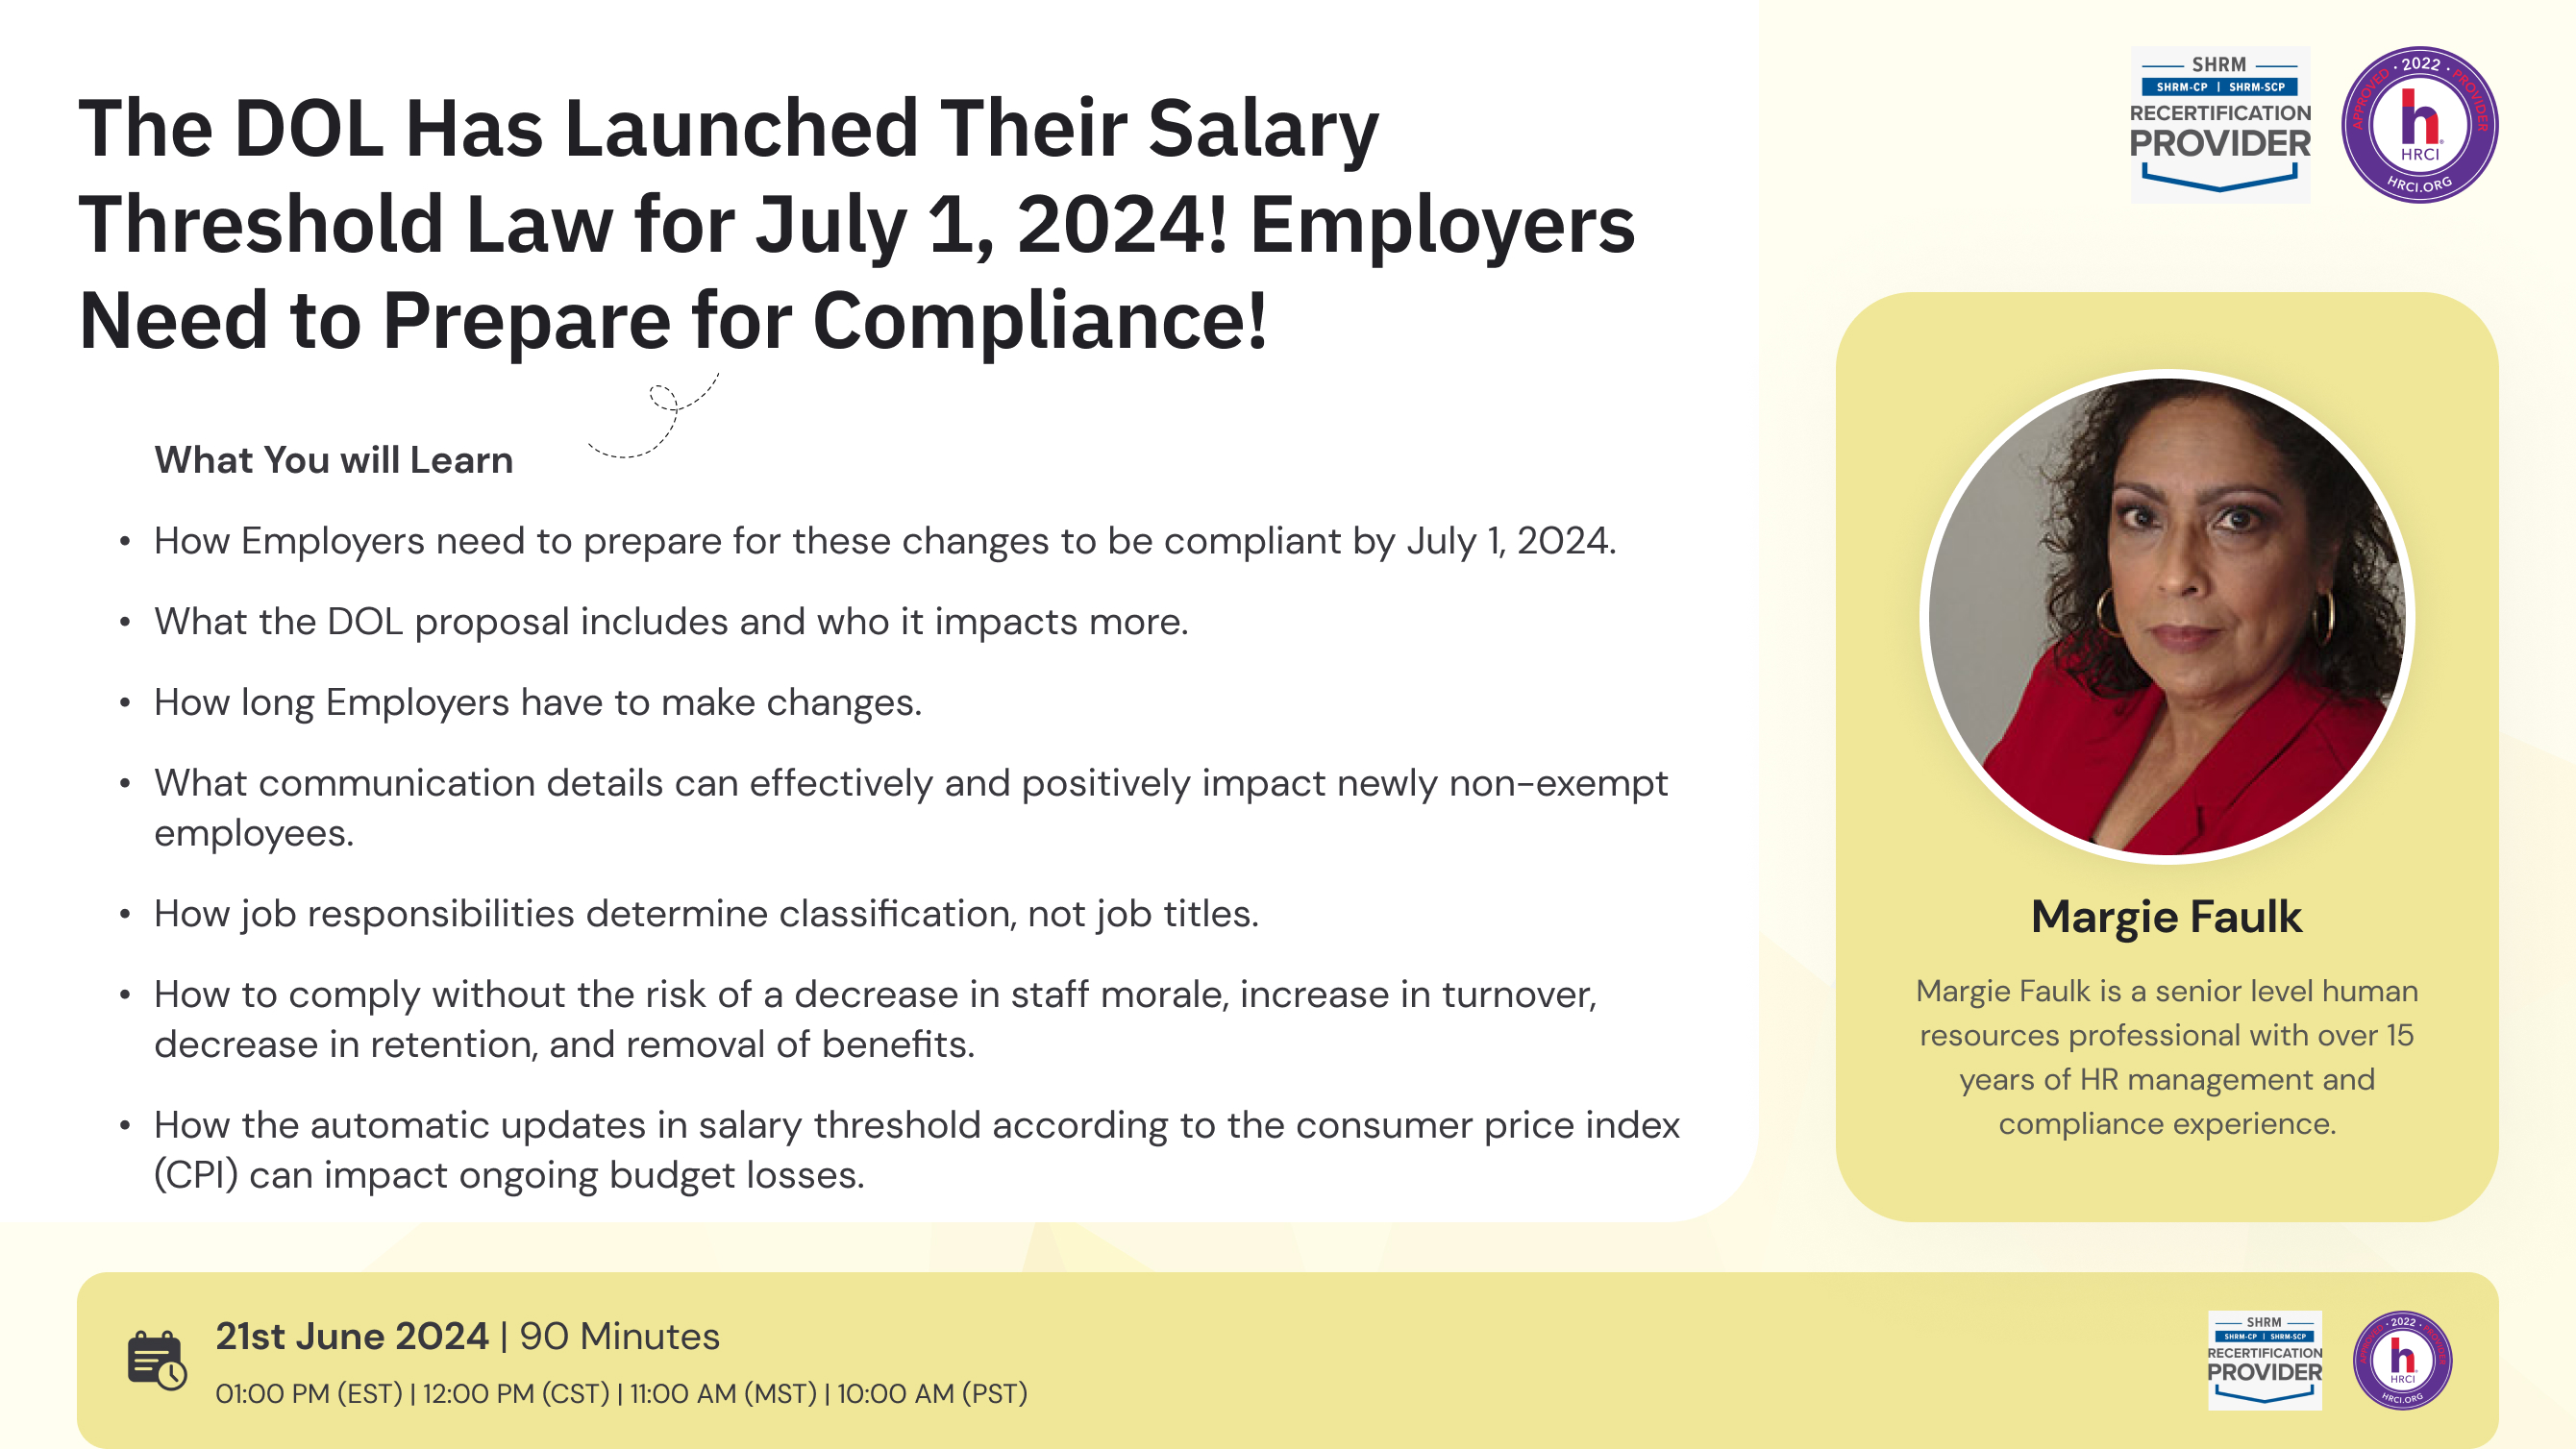 The DOL Has Launched Their Salary Threshold Law for July 1, 2024! Employers Need to Prepare for Compliance